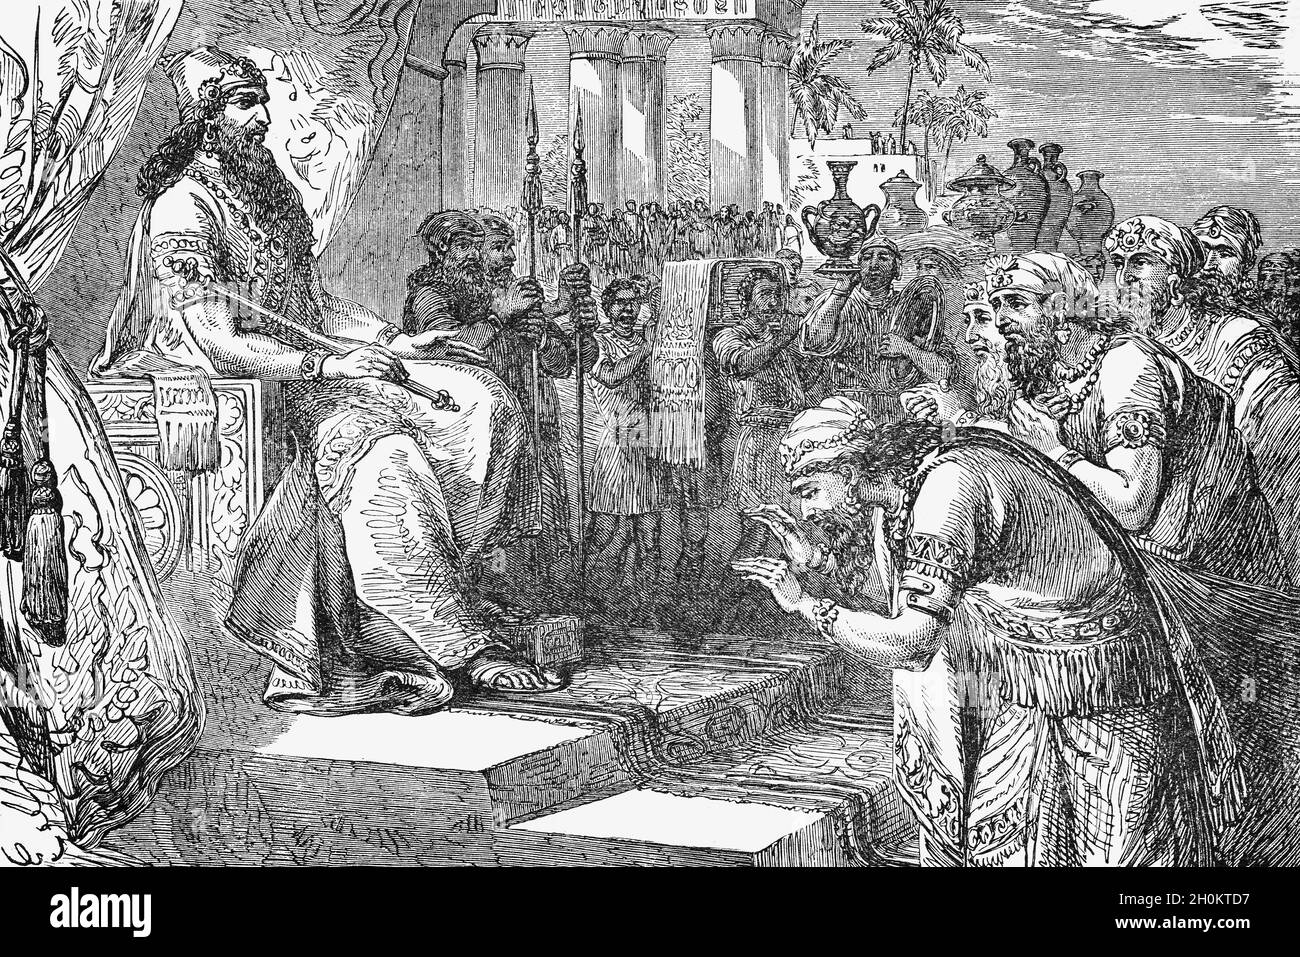 A late 19th Century illustration from the Book of Kings, in the old Testament, of King Solomon receiving the envoys of tributary nations. He ruled over all the kingdoms from the Euphrates River to the land of the Philistines, as far as the border of Egypt. These countries brought yearly tributes of 666 talents of gold (about 25 tons.) Stock Photo